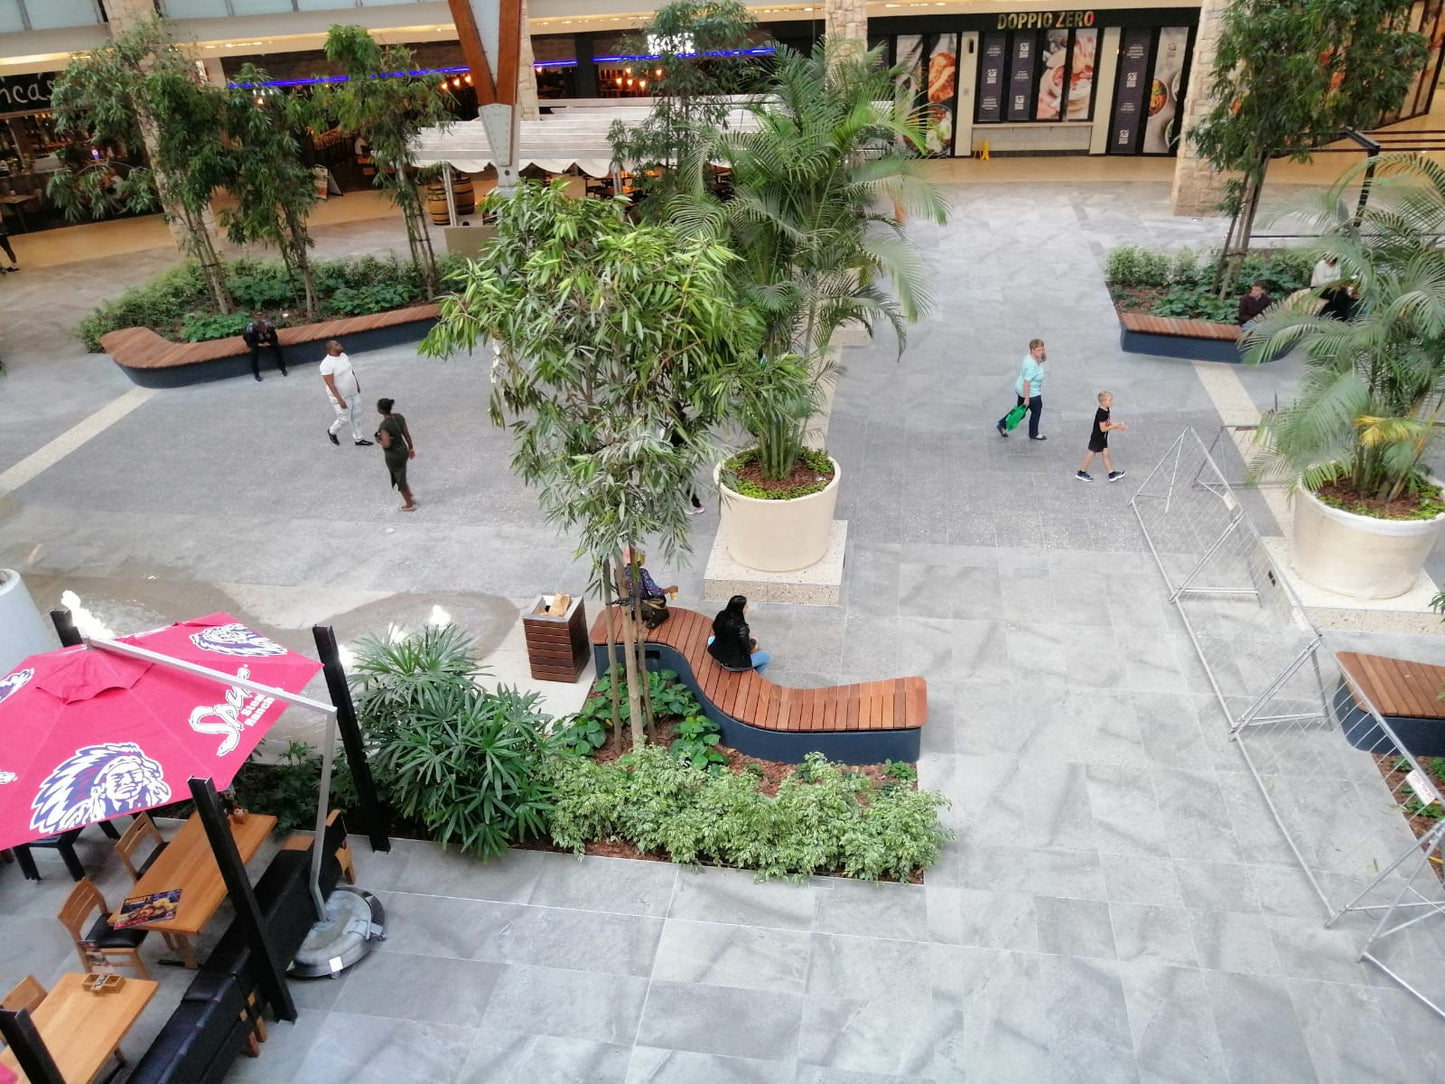 Clearwater Mall